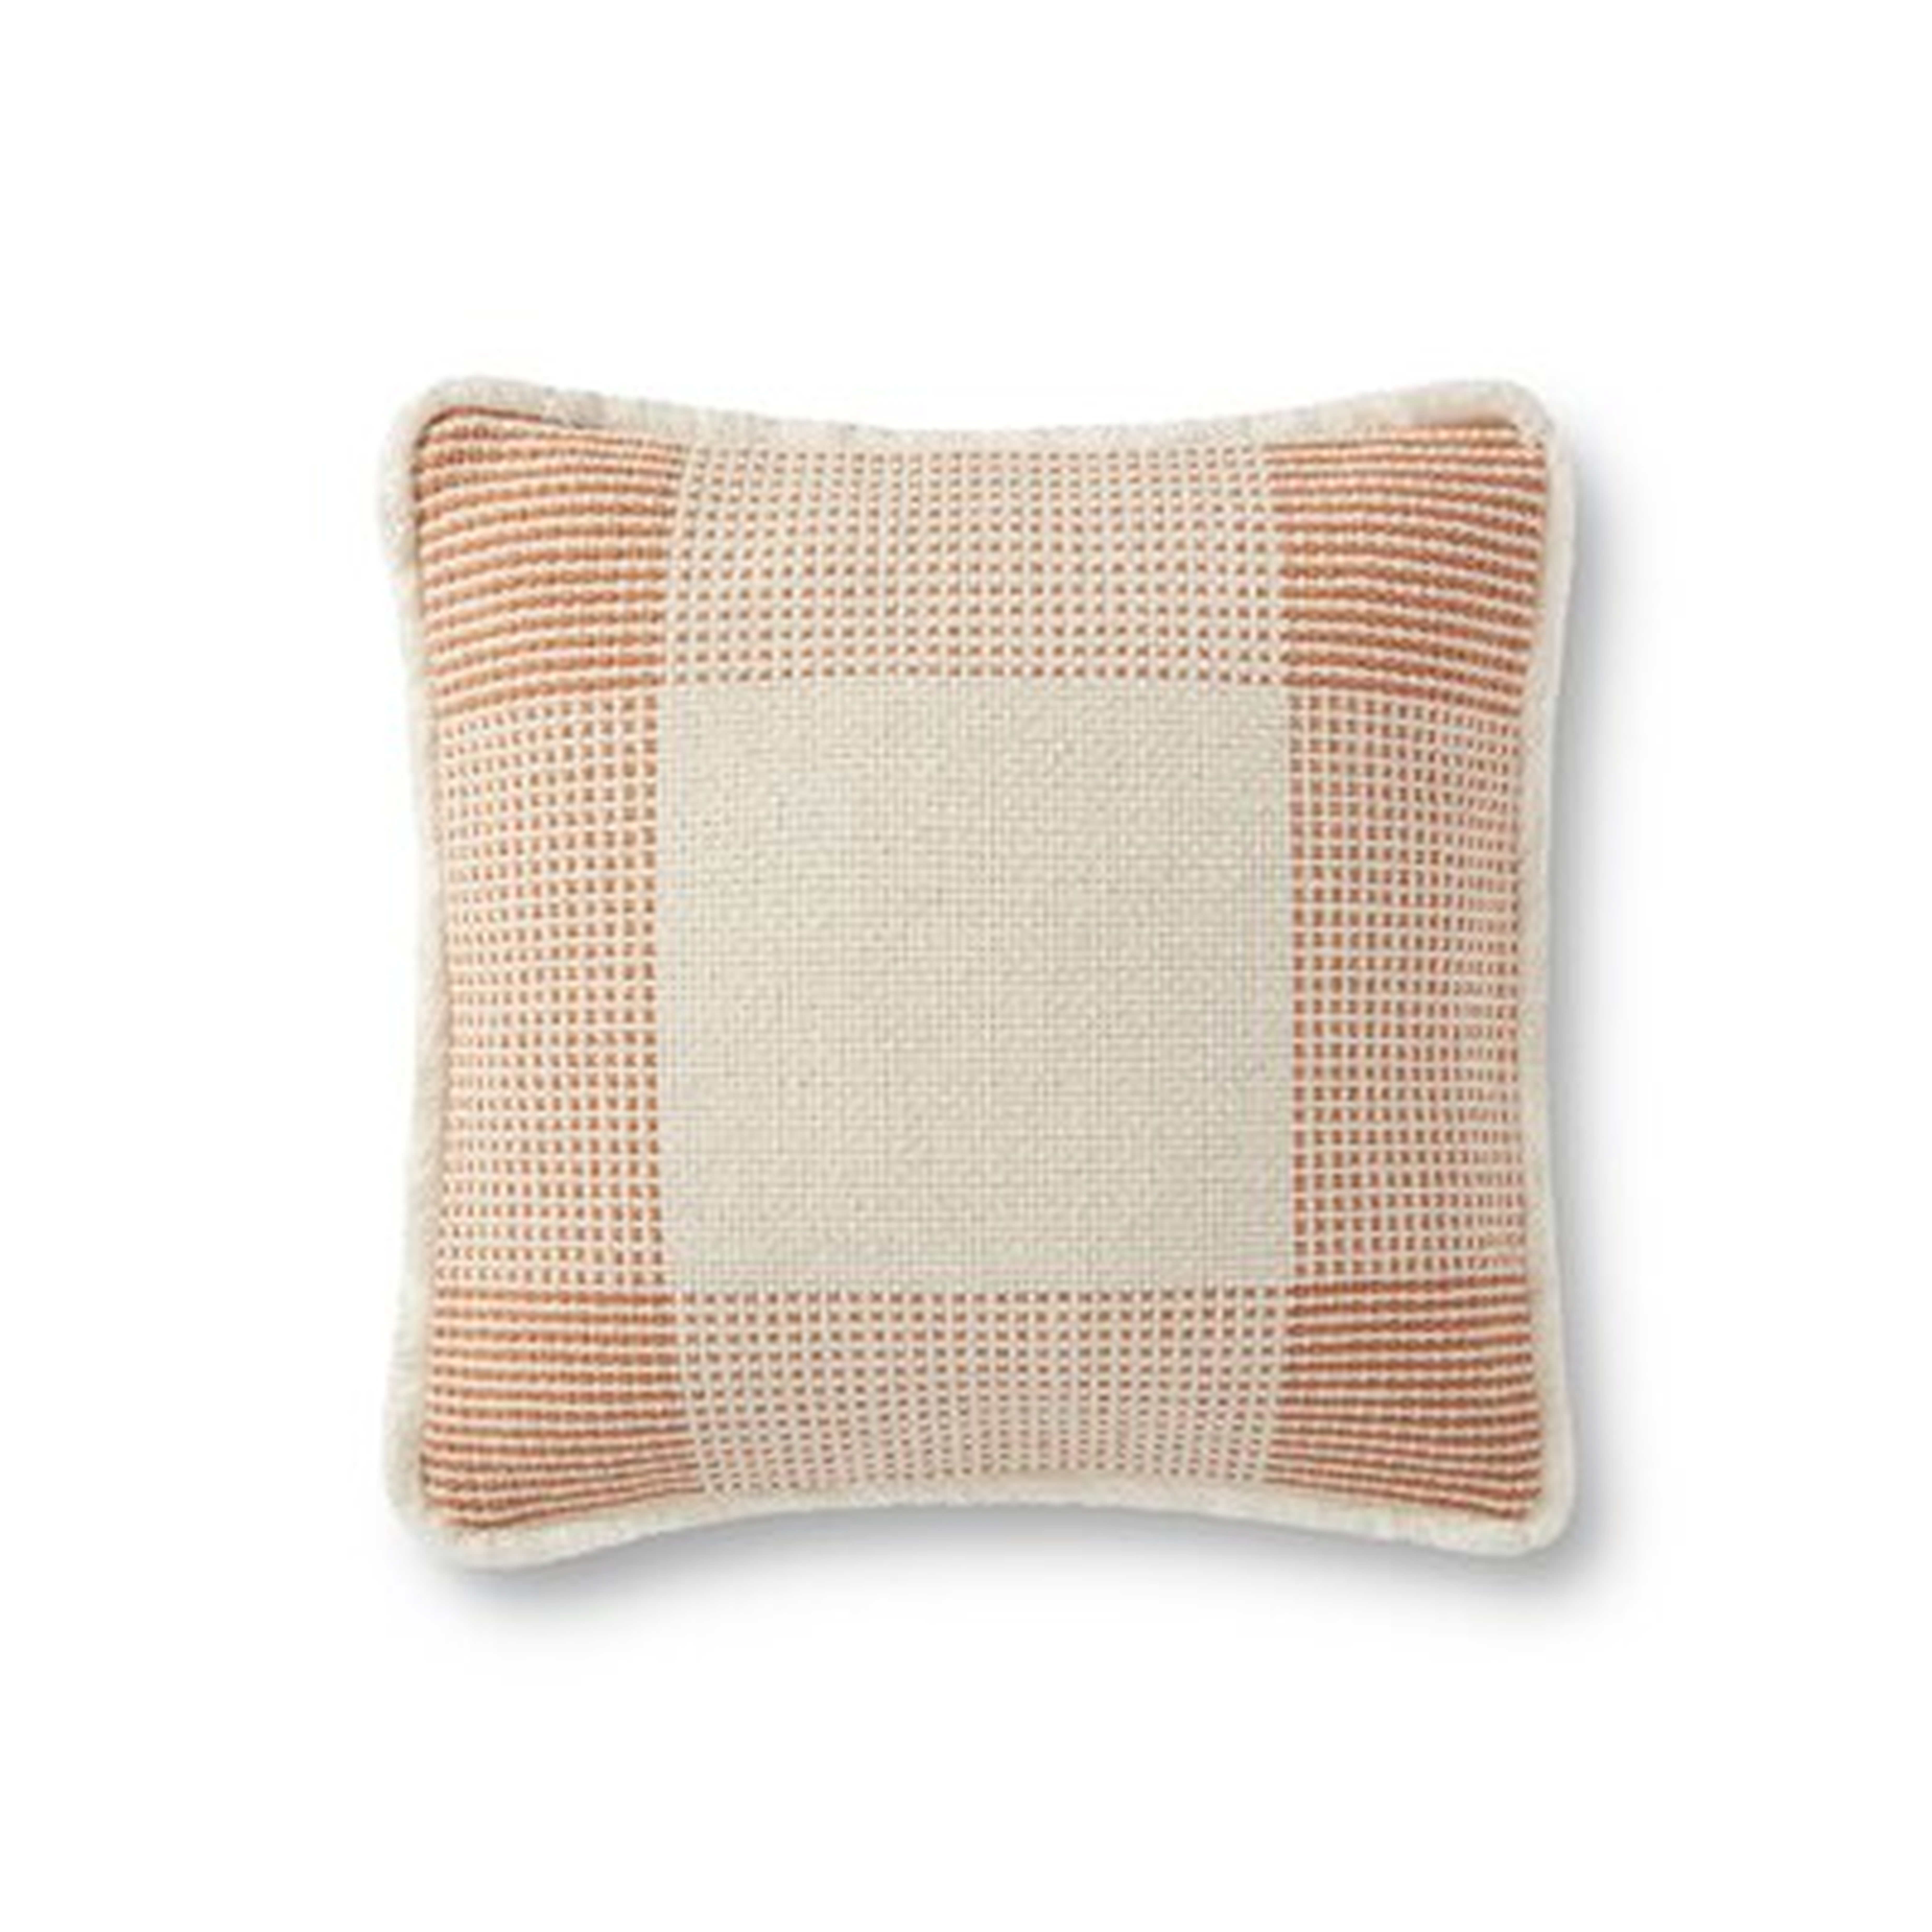 Decorative Square Pillow Cover and Insert - Wayfair